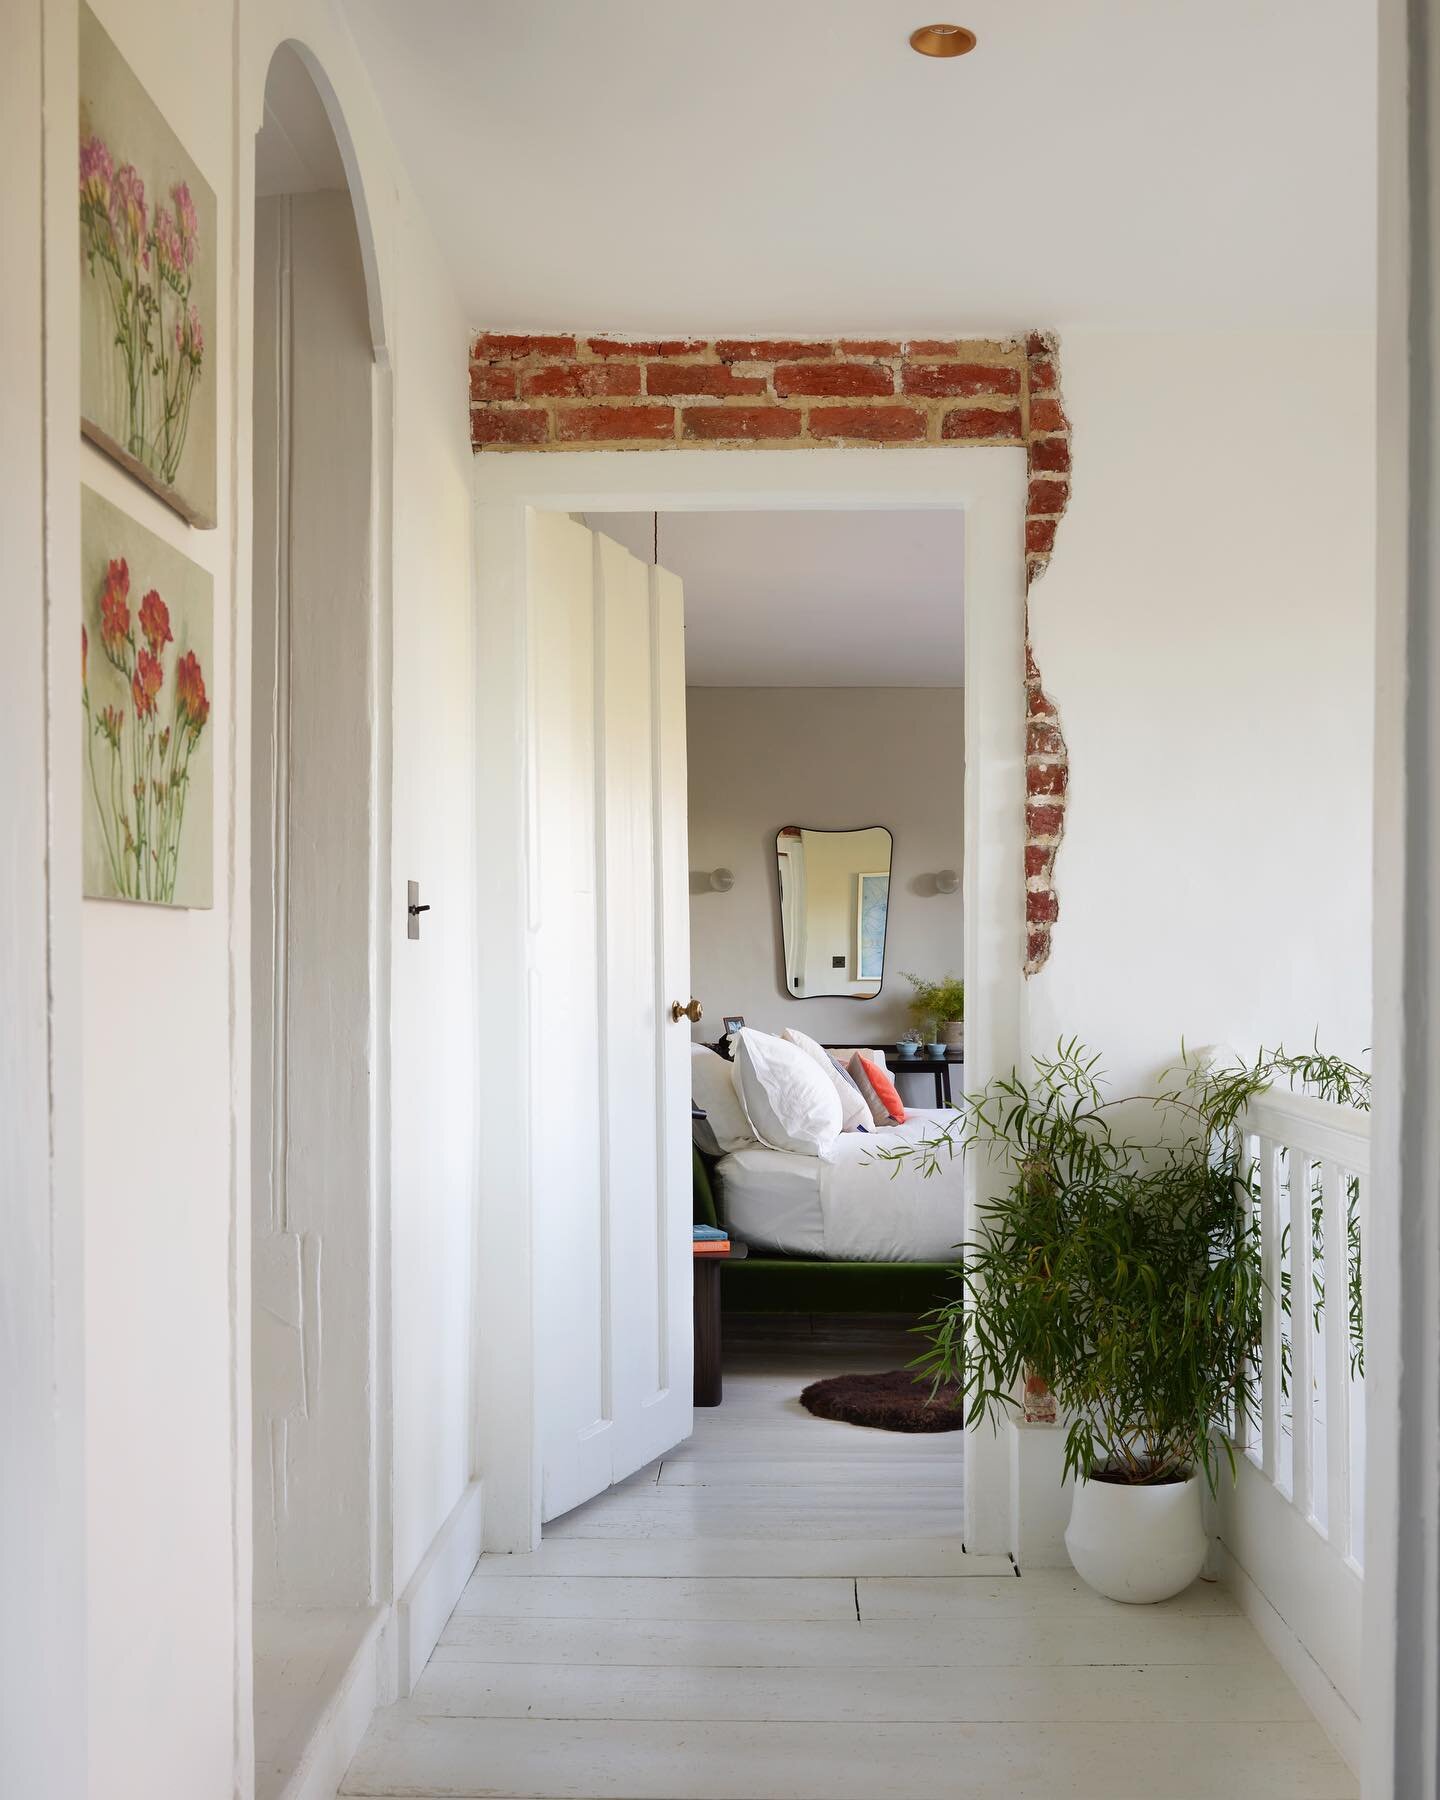 History revealing itself in a single moment. Preserving the traditional character of old buildings is always prioritised in our designs. Exposed brickwork juxtaposed against new plaster adds charm and texture to our Cottage project in Hambleden.

#st